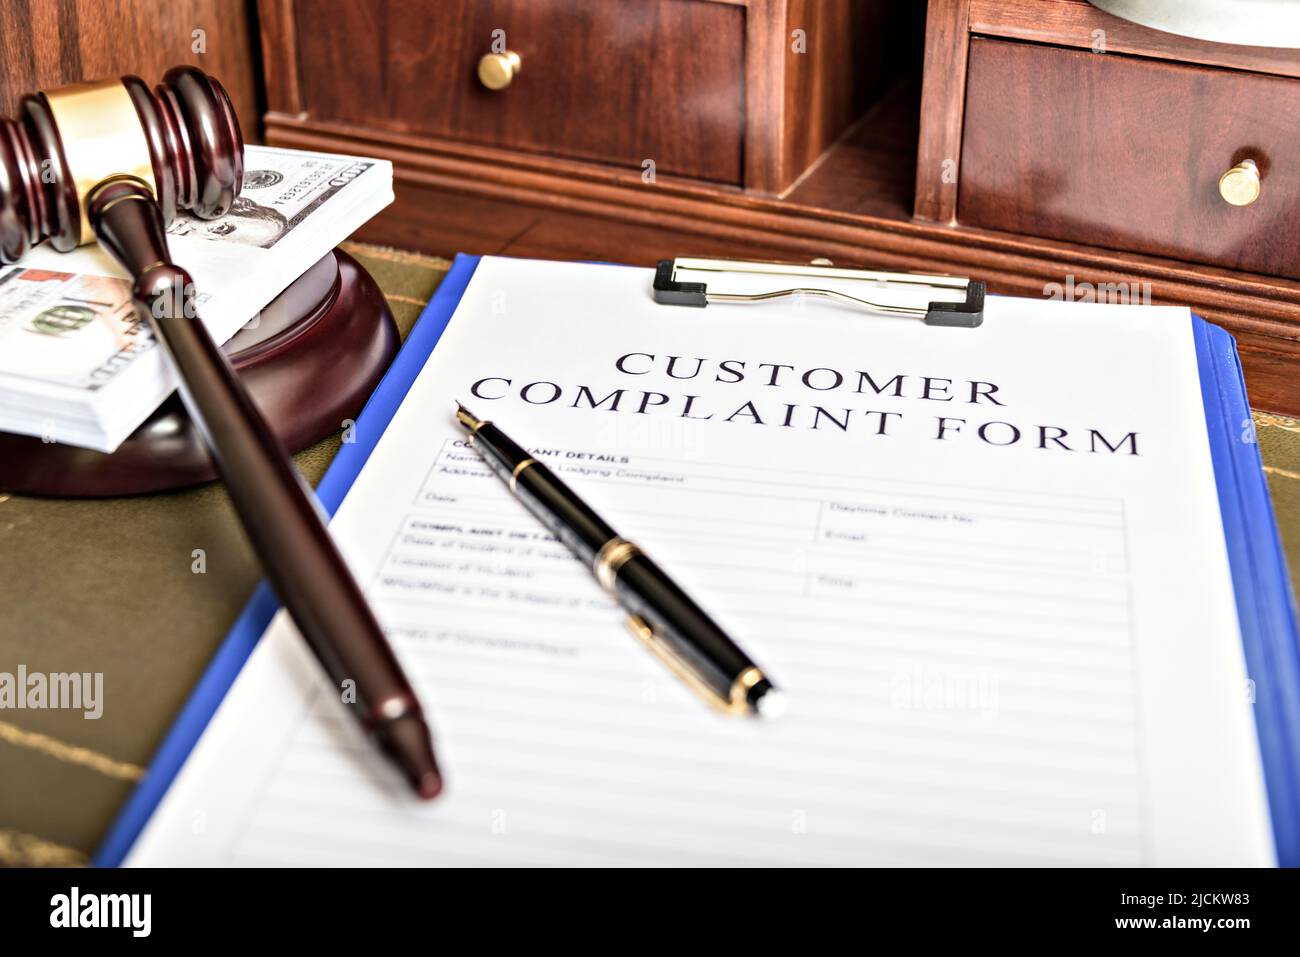 Complaint Form Customer Response Concept. focus on the main text. Stock Photo